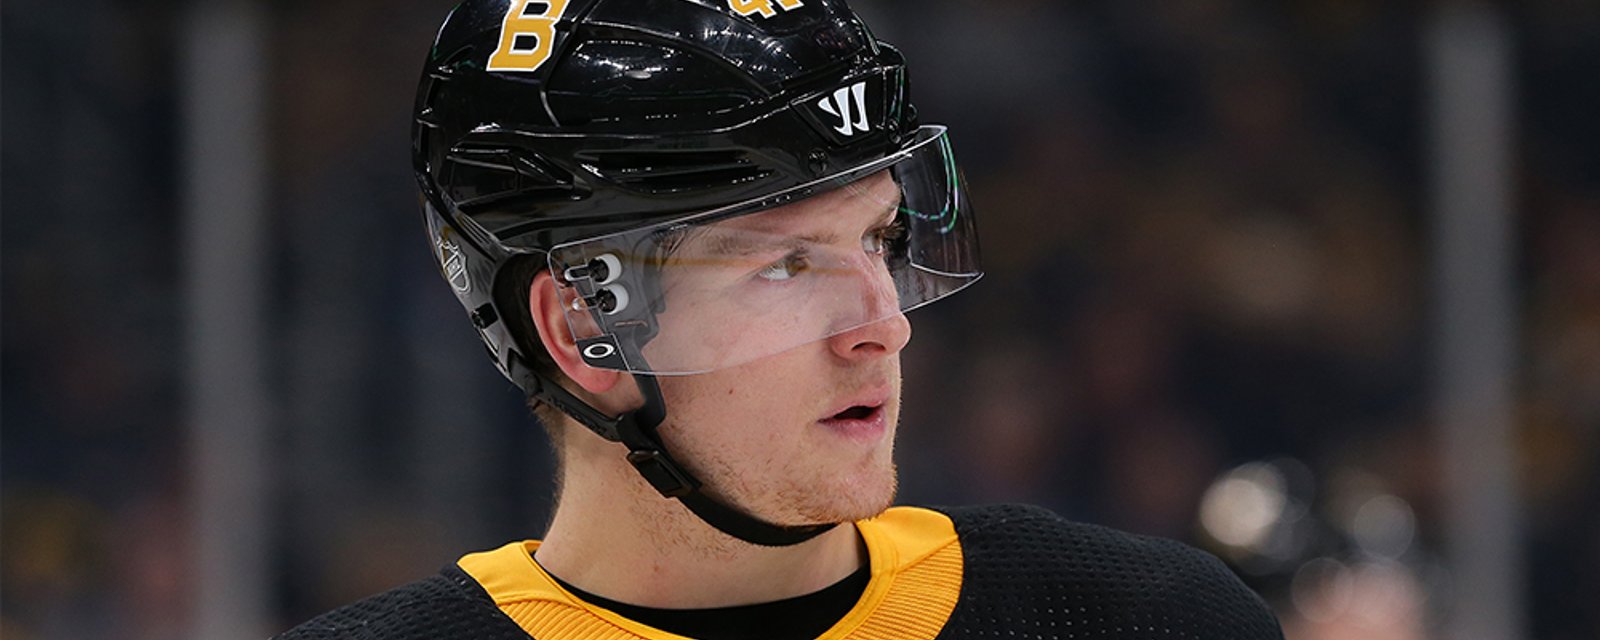 Krug laments playing his “last game as a Bruin”